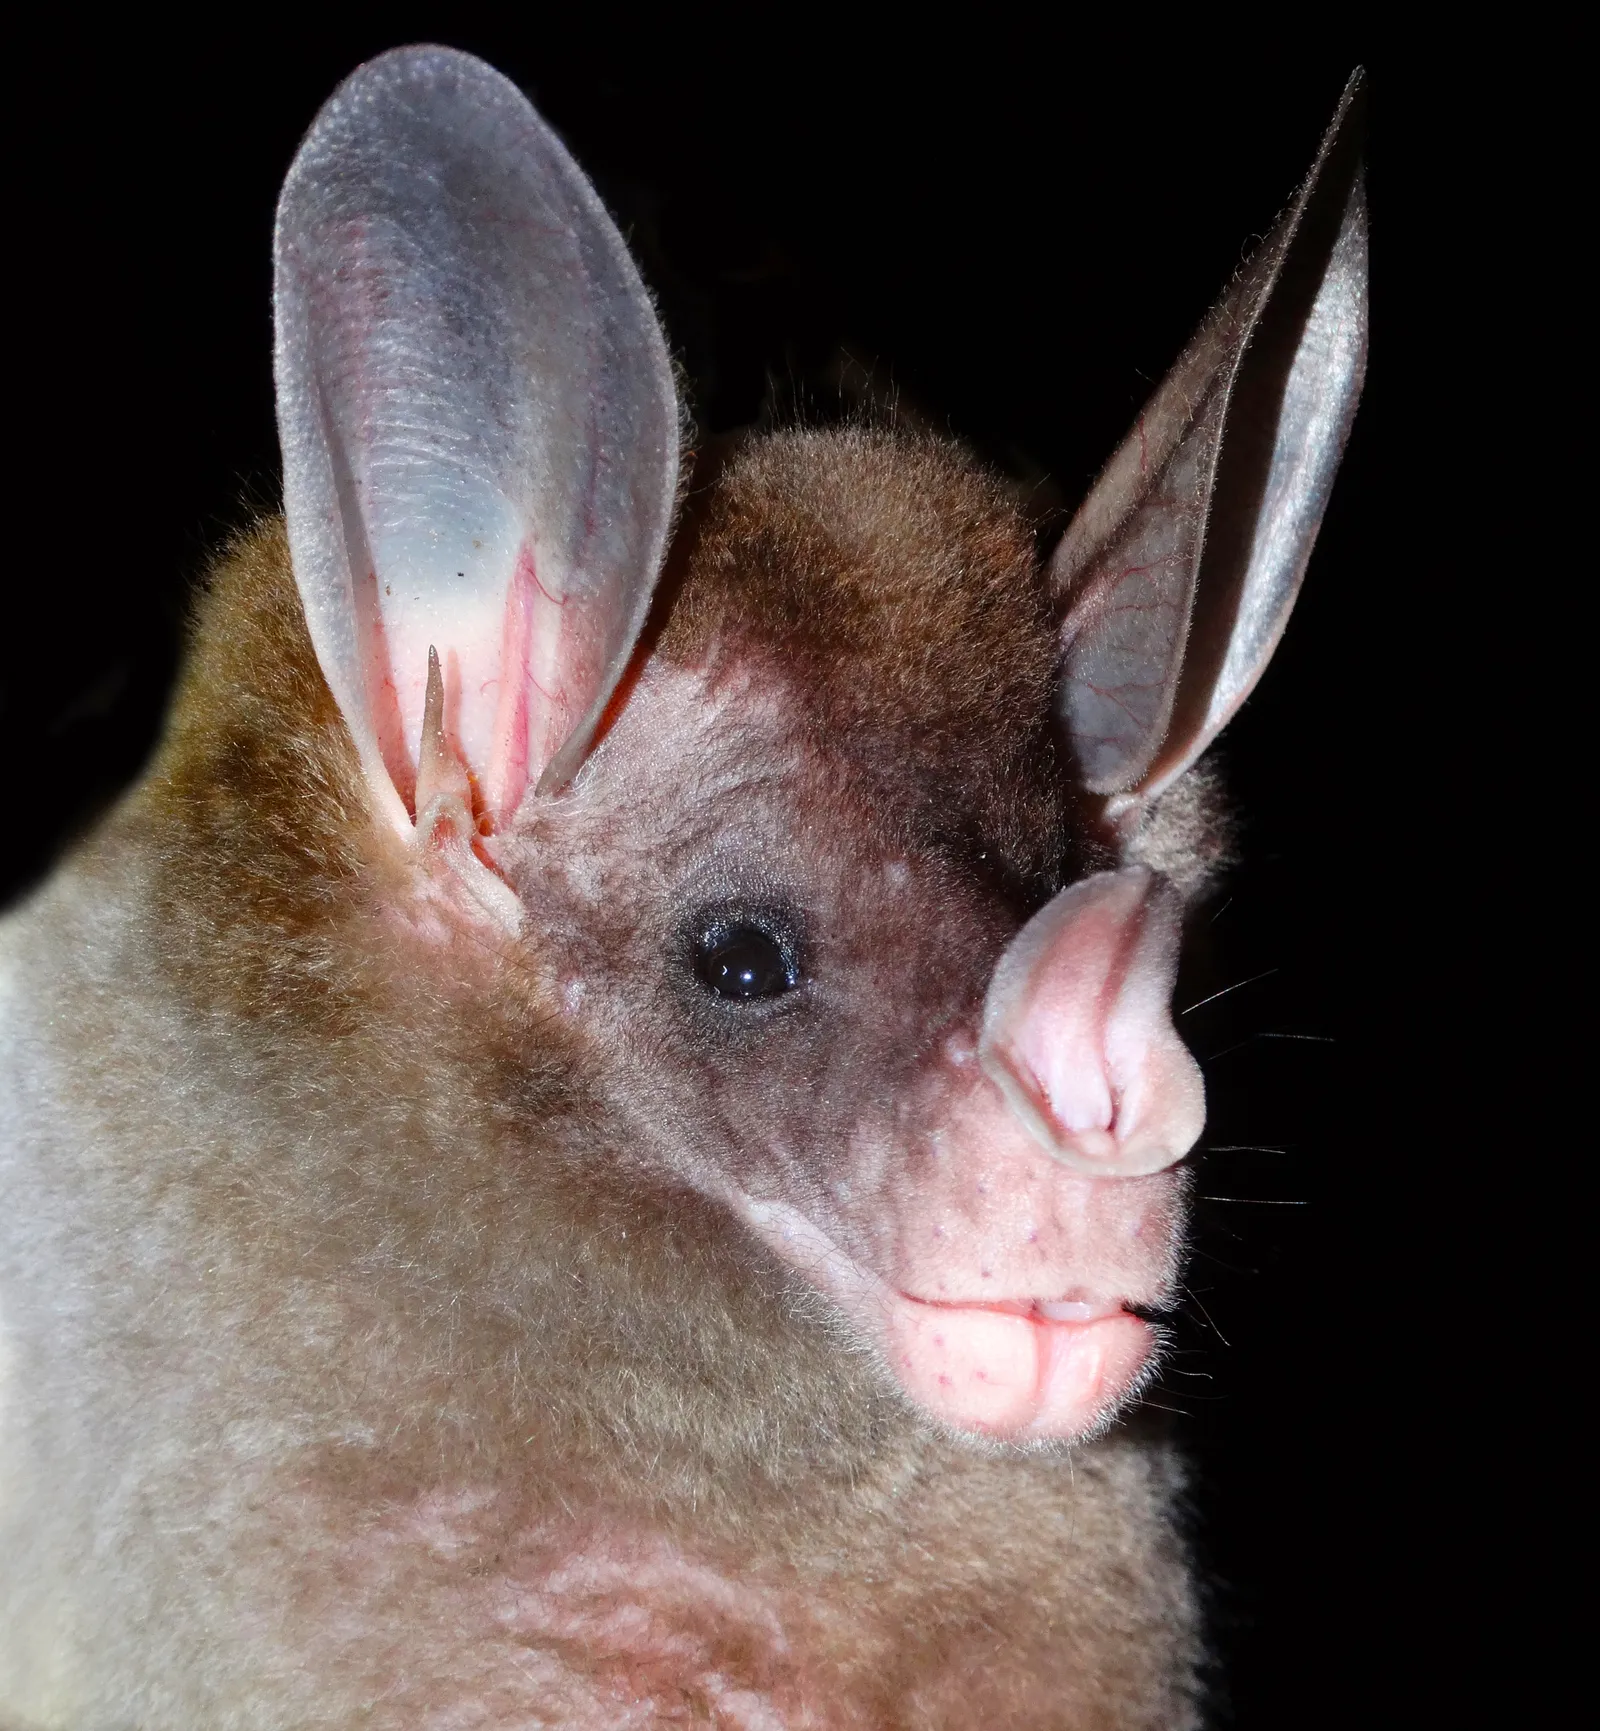 The World's Carnivorous Bats Are Emerging From the | Science| Magazine